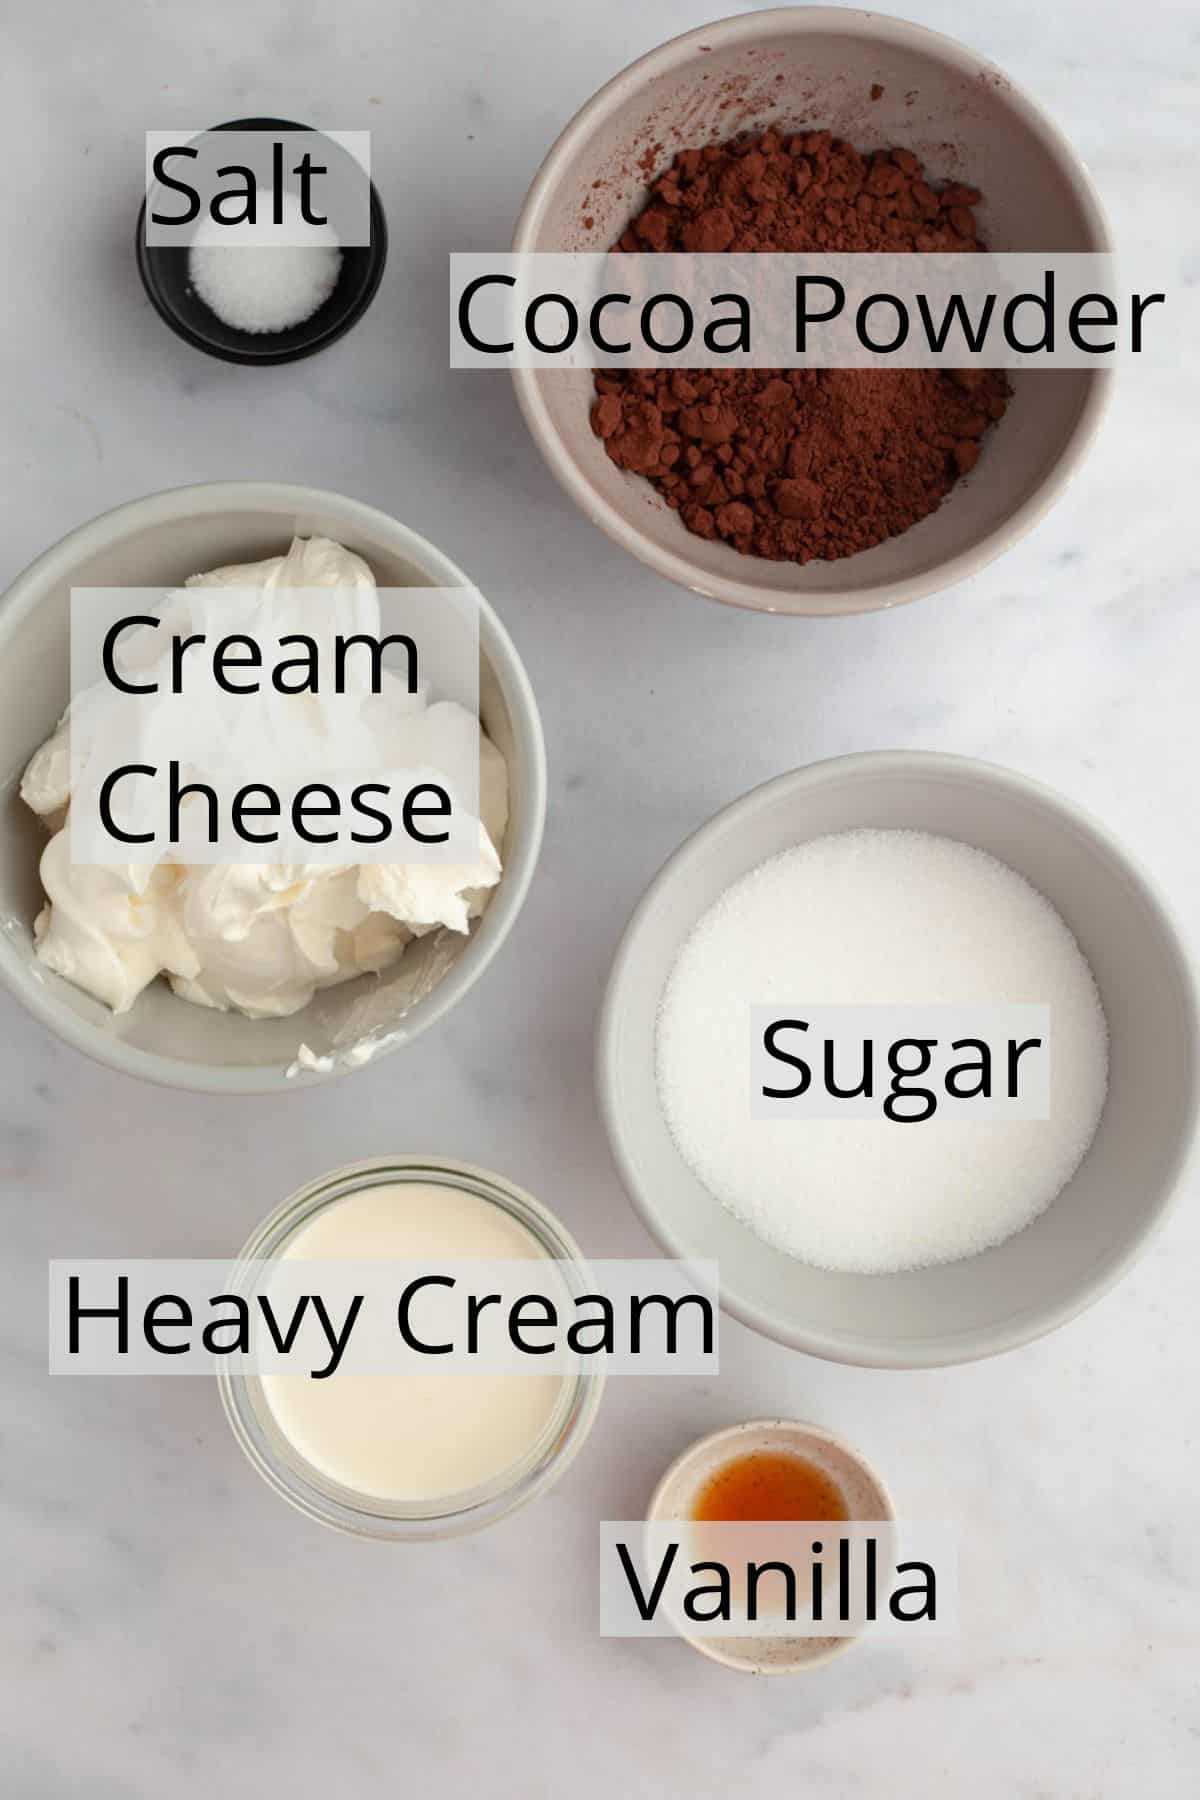 All the ingredients needed to make chocolate cream cheese frosting weighed out into small bowls.